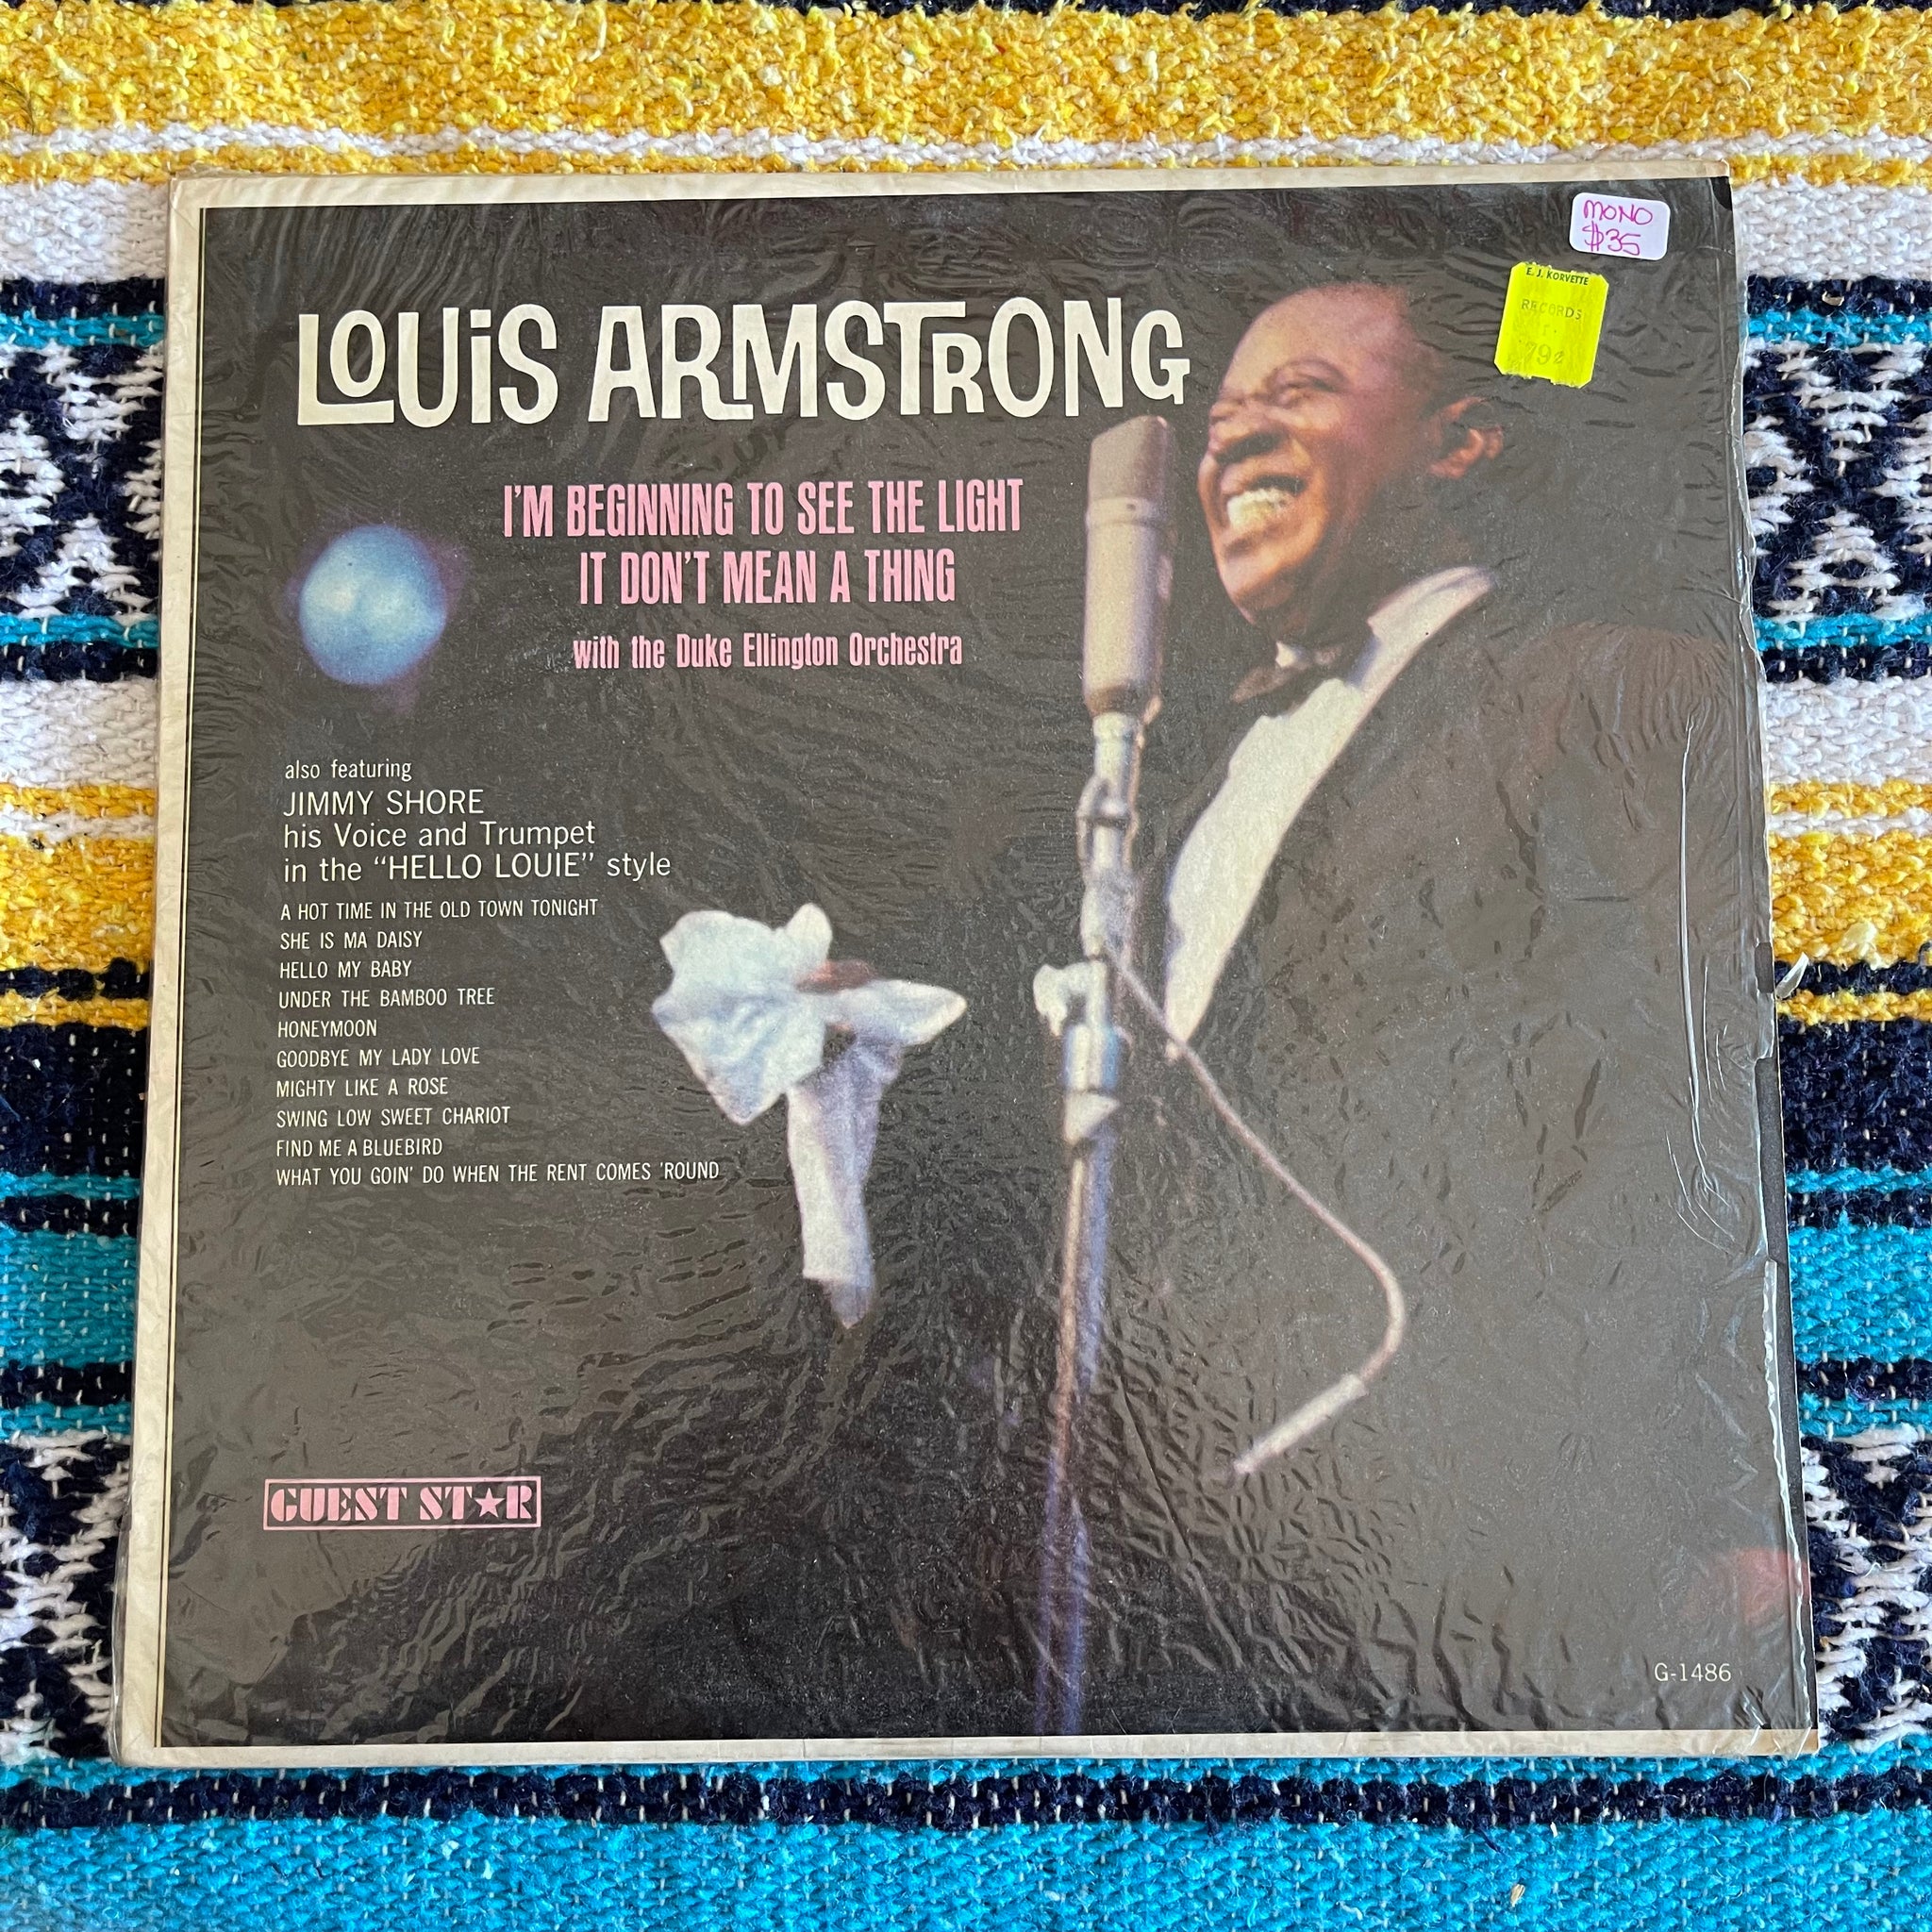 Louis Armstrong-I’m Beginning to See the Light It Don’t Mean a thing MONO